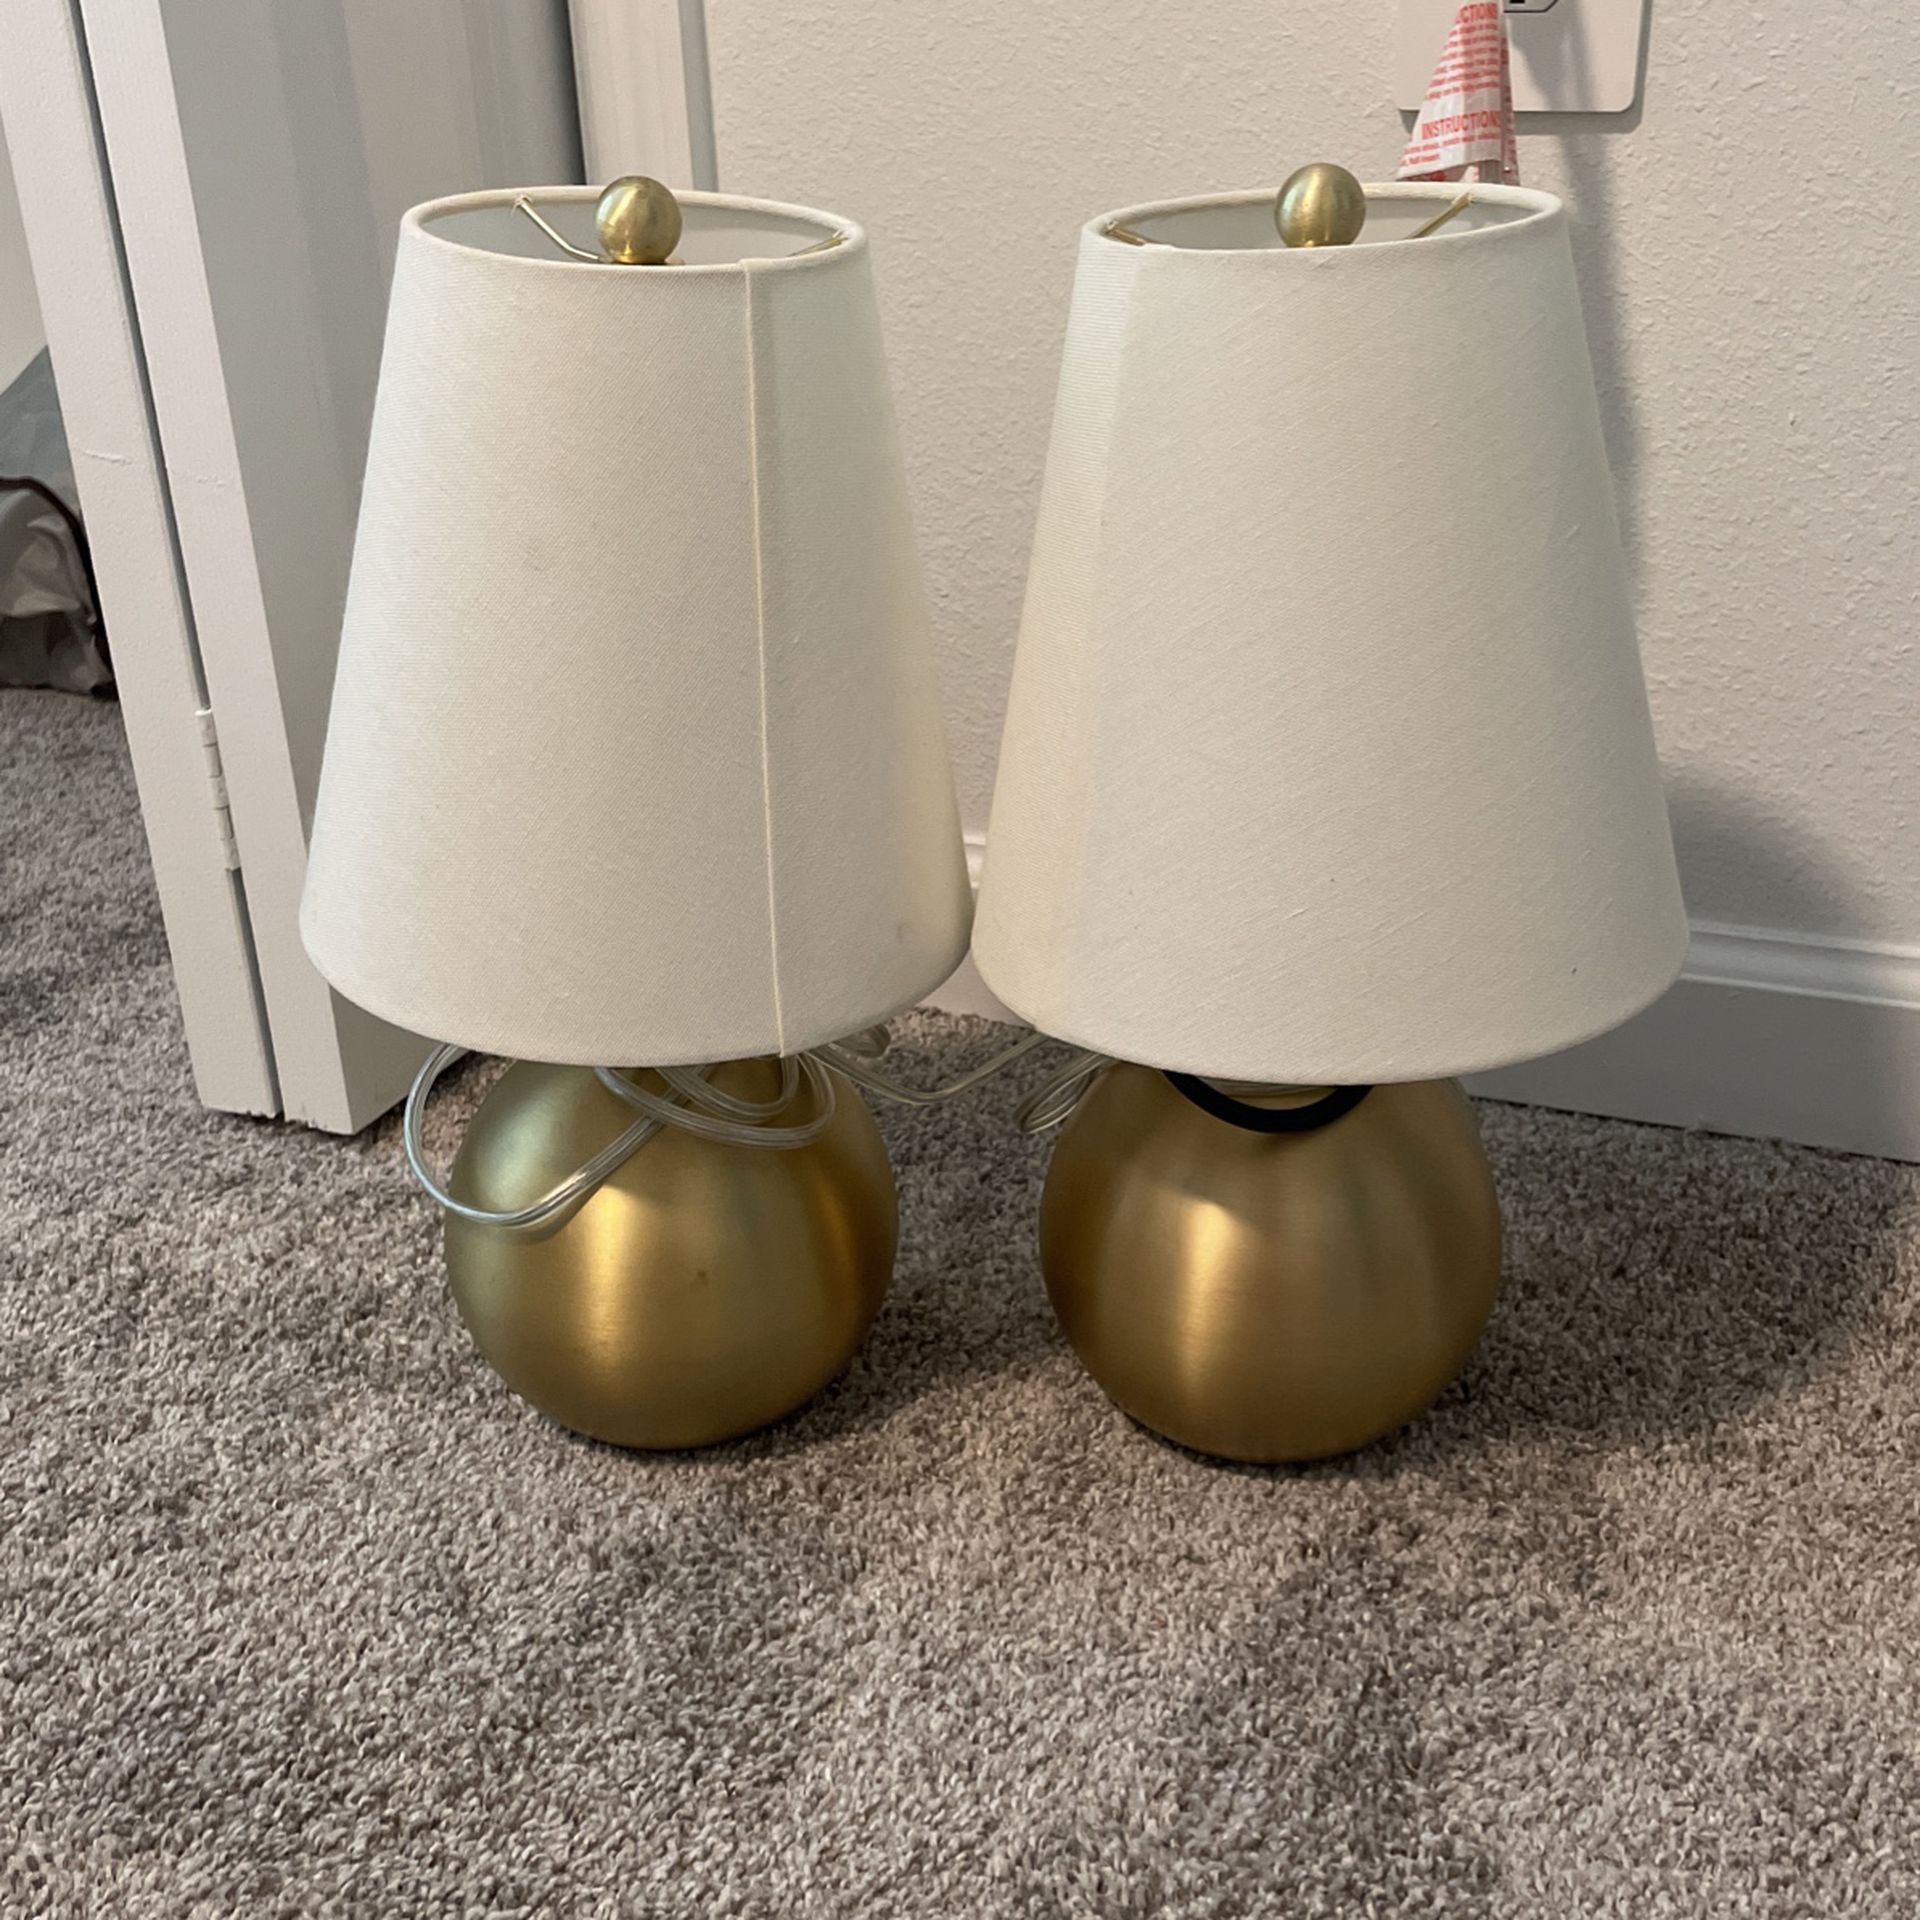 Two Kate Spade Lamps for Sale in St. Cloud, FL - OfferUp